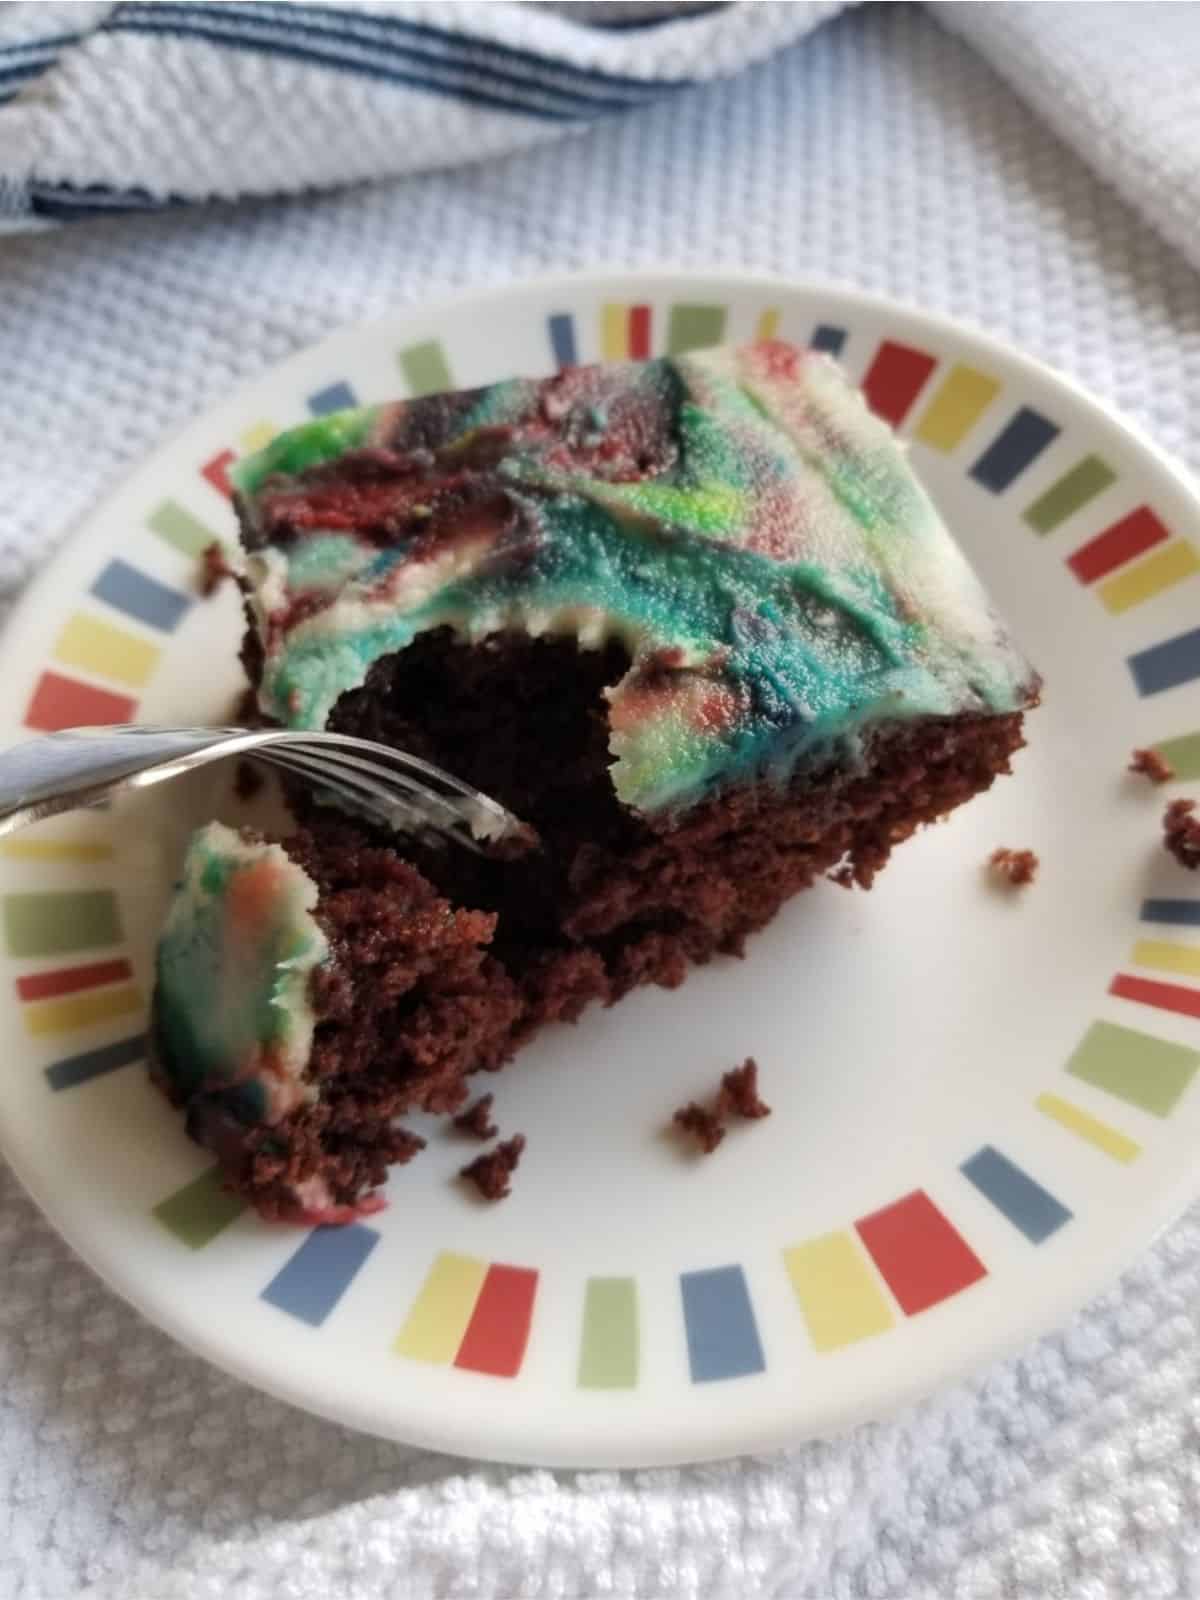 A slice of vegan chocolate cake with colorful icing. There is a fork taking a piece out of the cake.